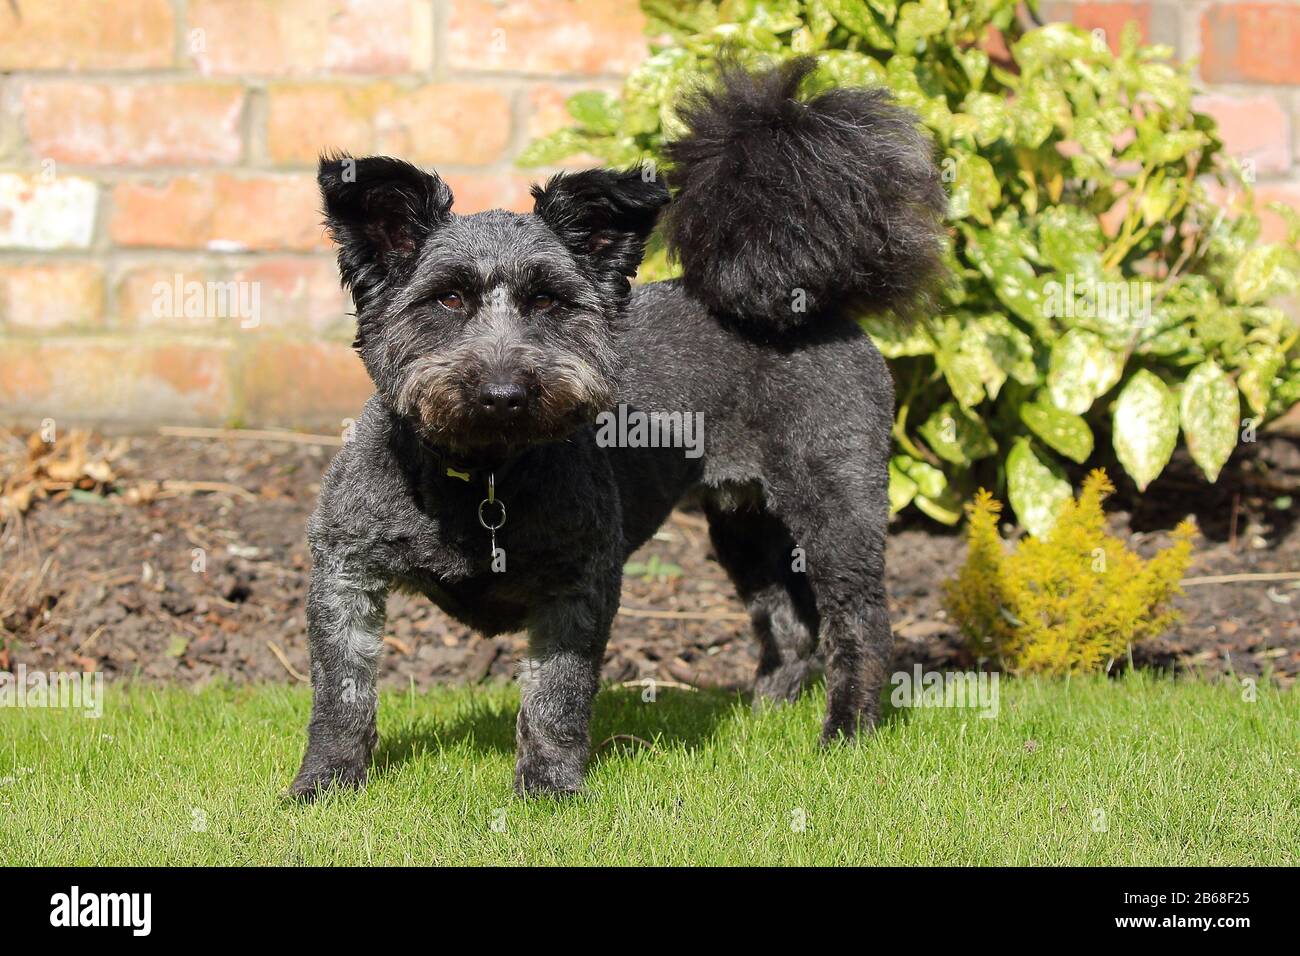 cute black terrier dog standing looking at the camera with ears pricked up and prominent bushy tail Stock Photo